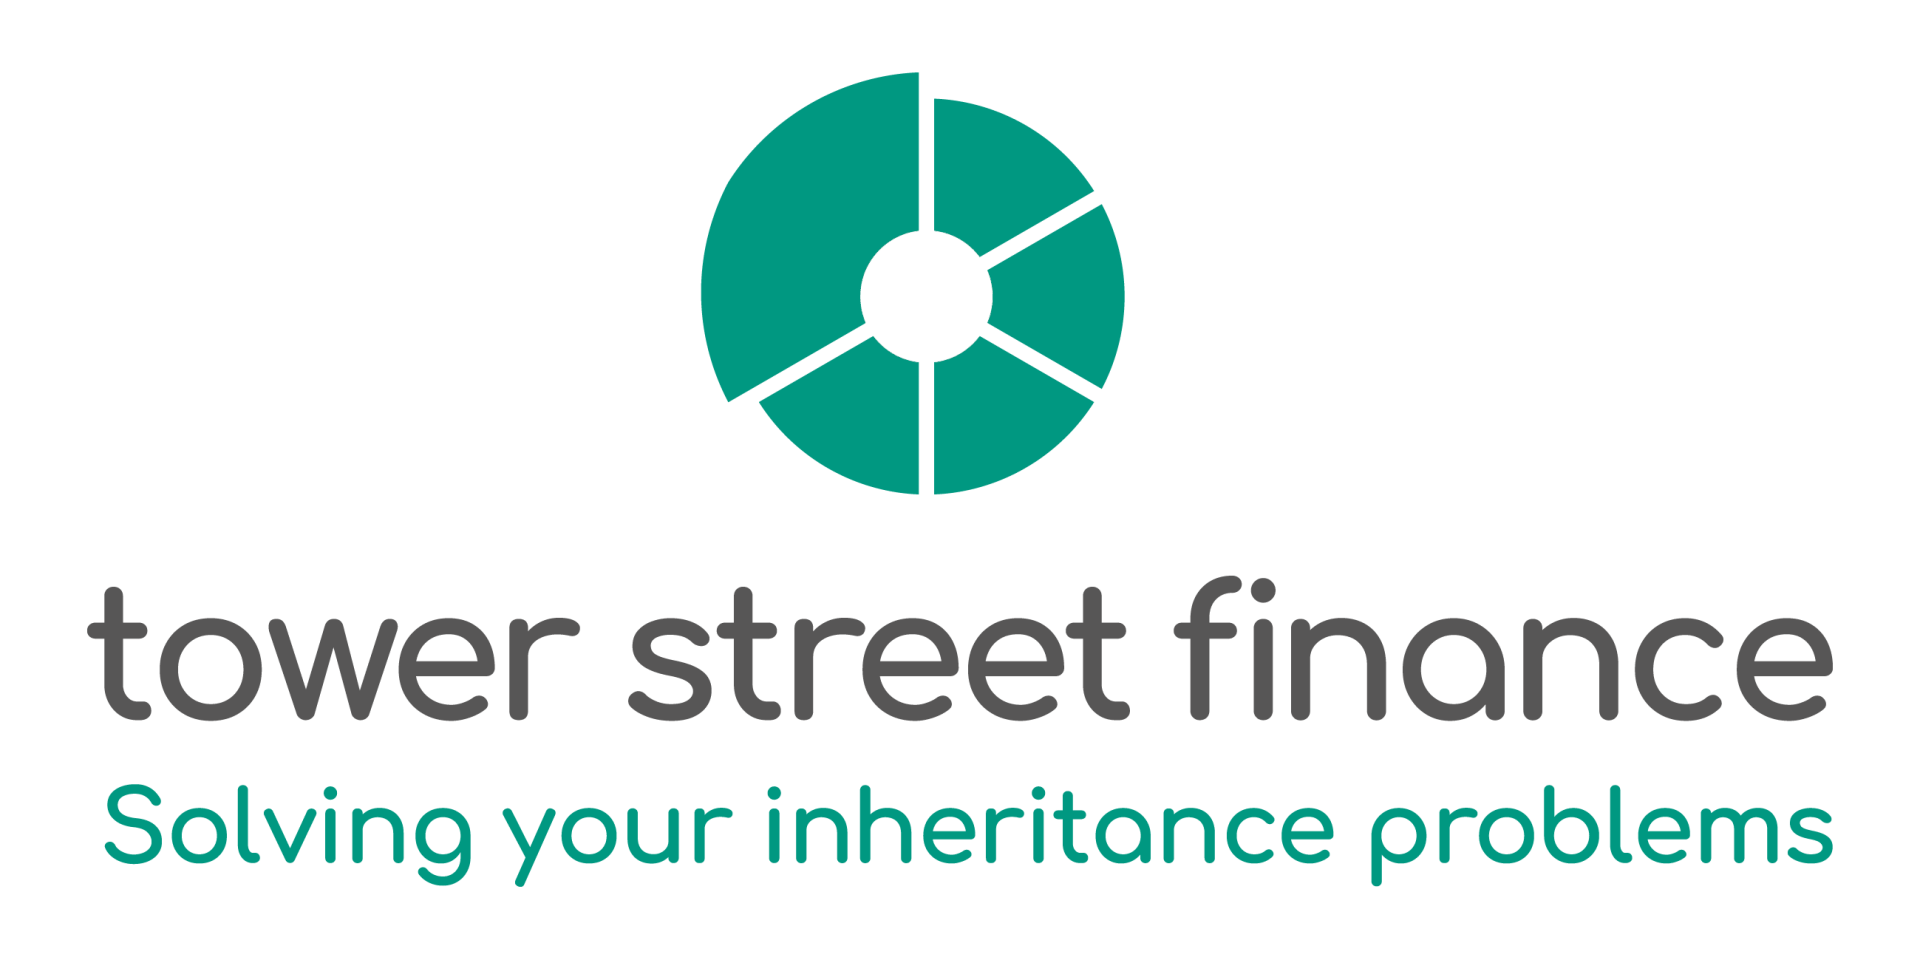 ‘The ‘I’ Word’ – exclusive findings on inheritance from Tower Street Finance